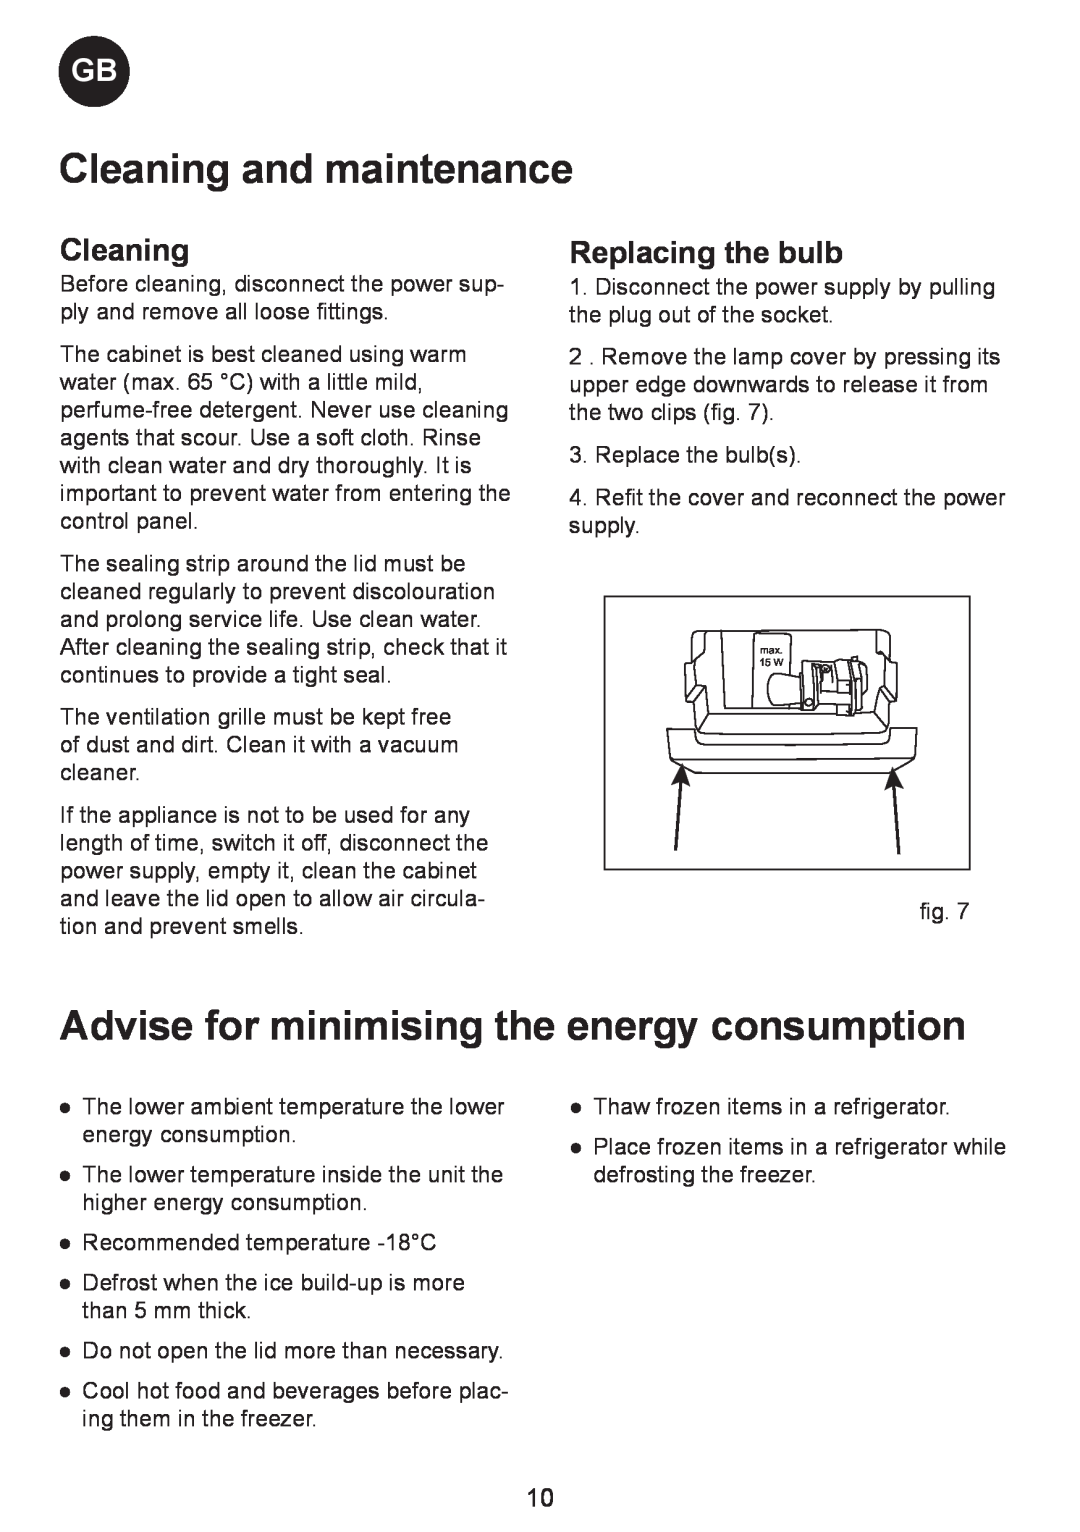 Smeg CH500, CH400, CH300 manual Cleaning and maintenance, Advise for minimising the energy consumption, Replacing the bulb 